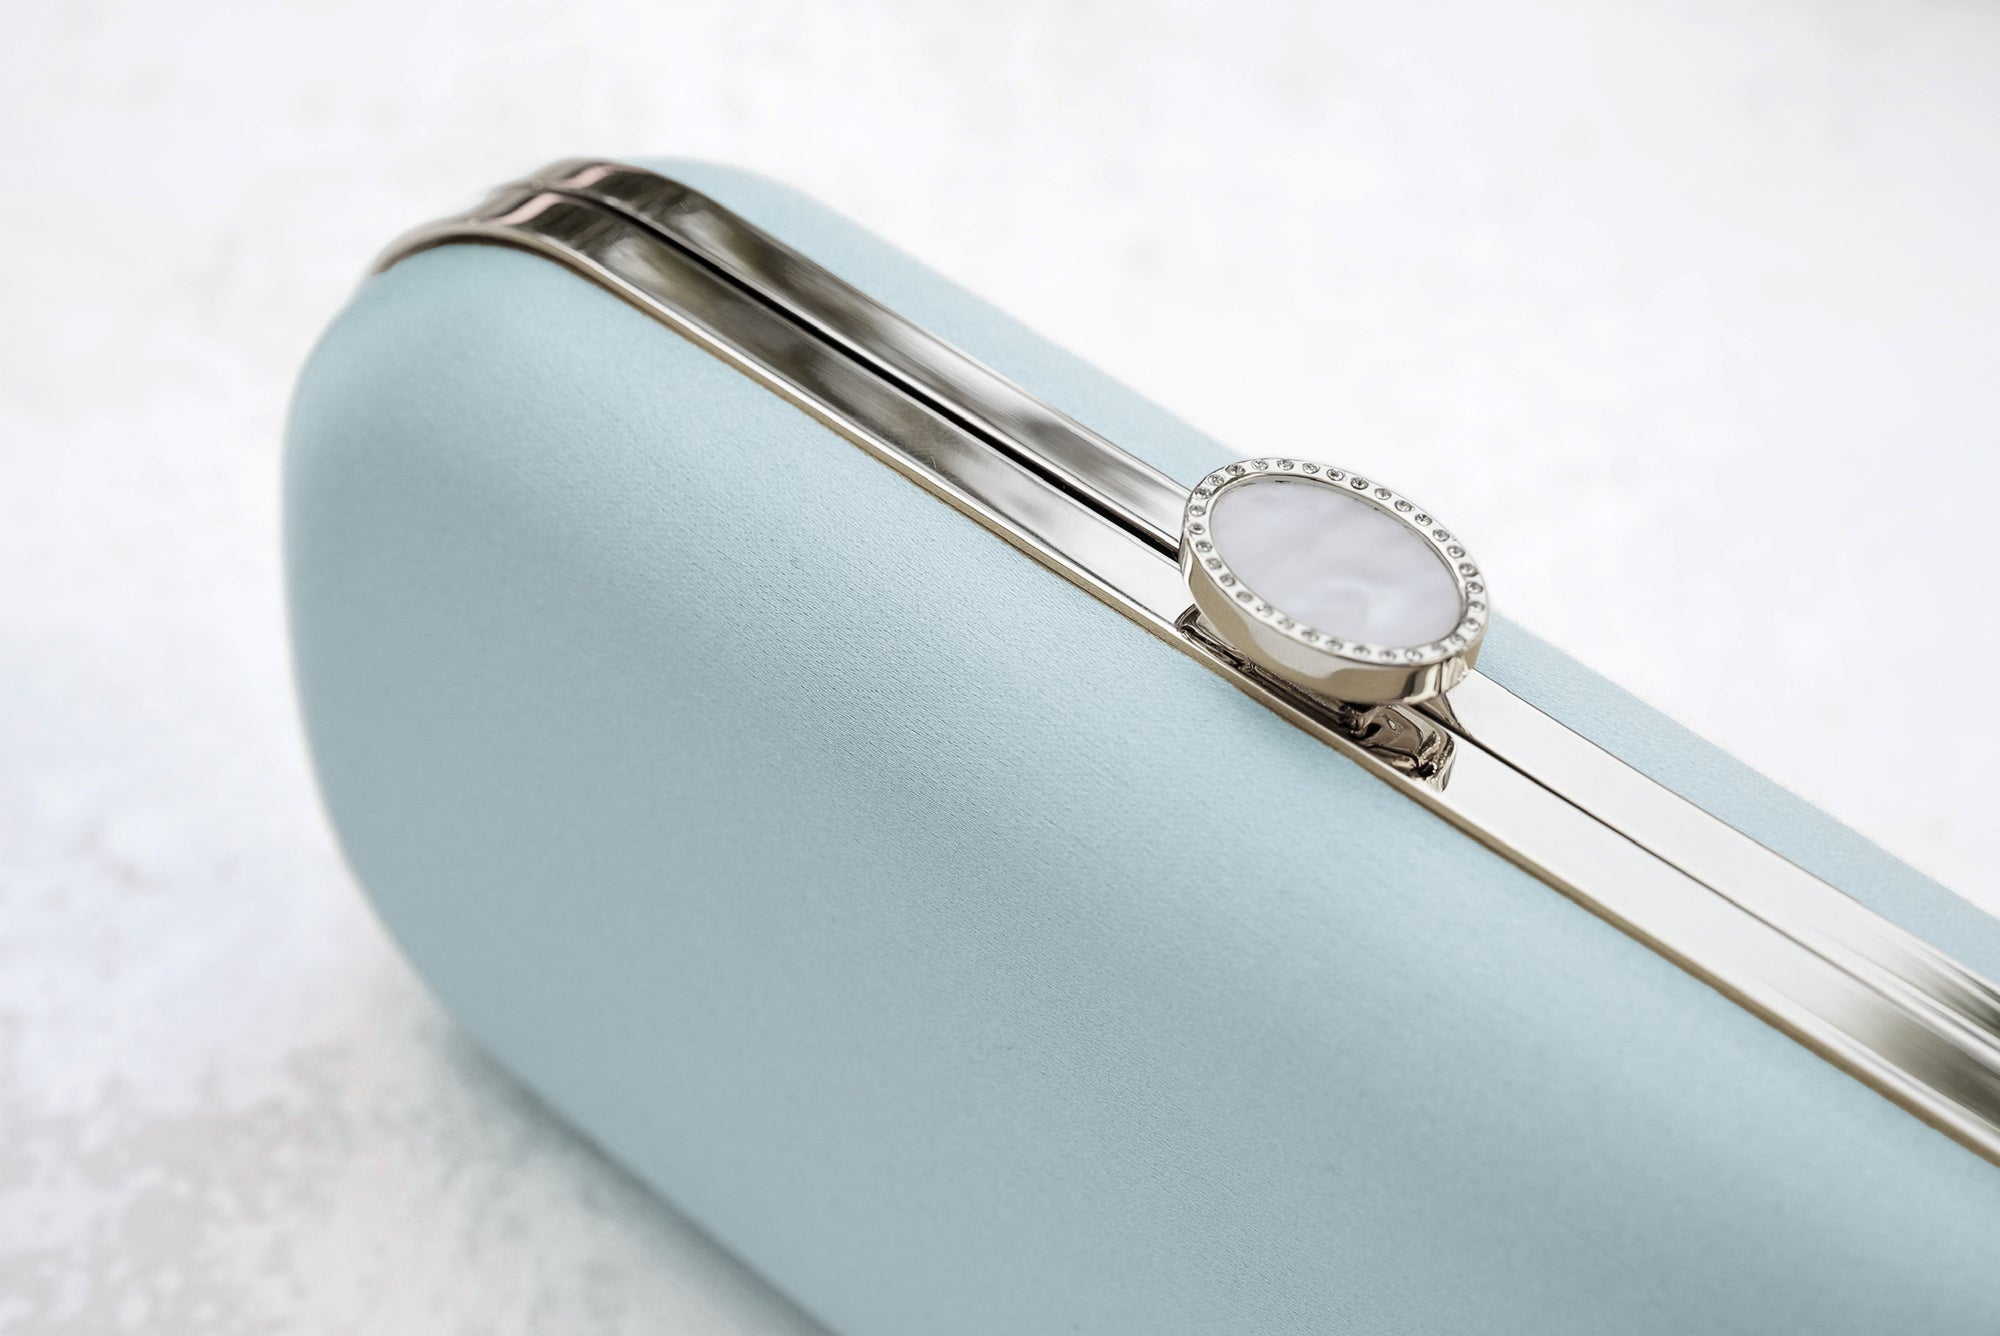 Elegant wristwatch with a white face and silver detailing resting on a pale blue The Bella Rosa Collection Cinderella Blue Petite Bella Clutch.